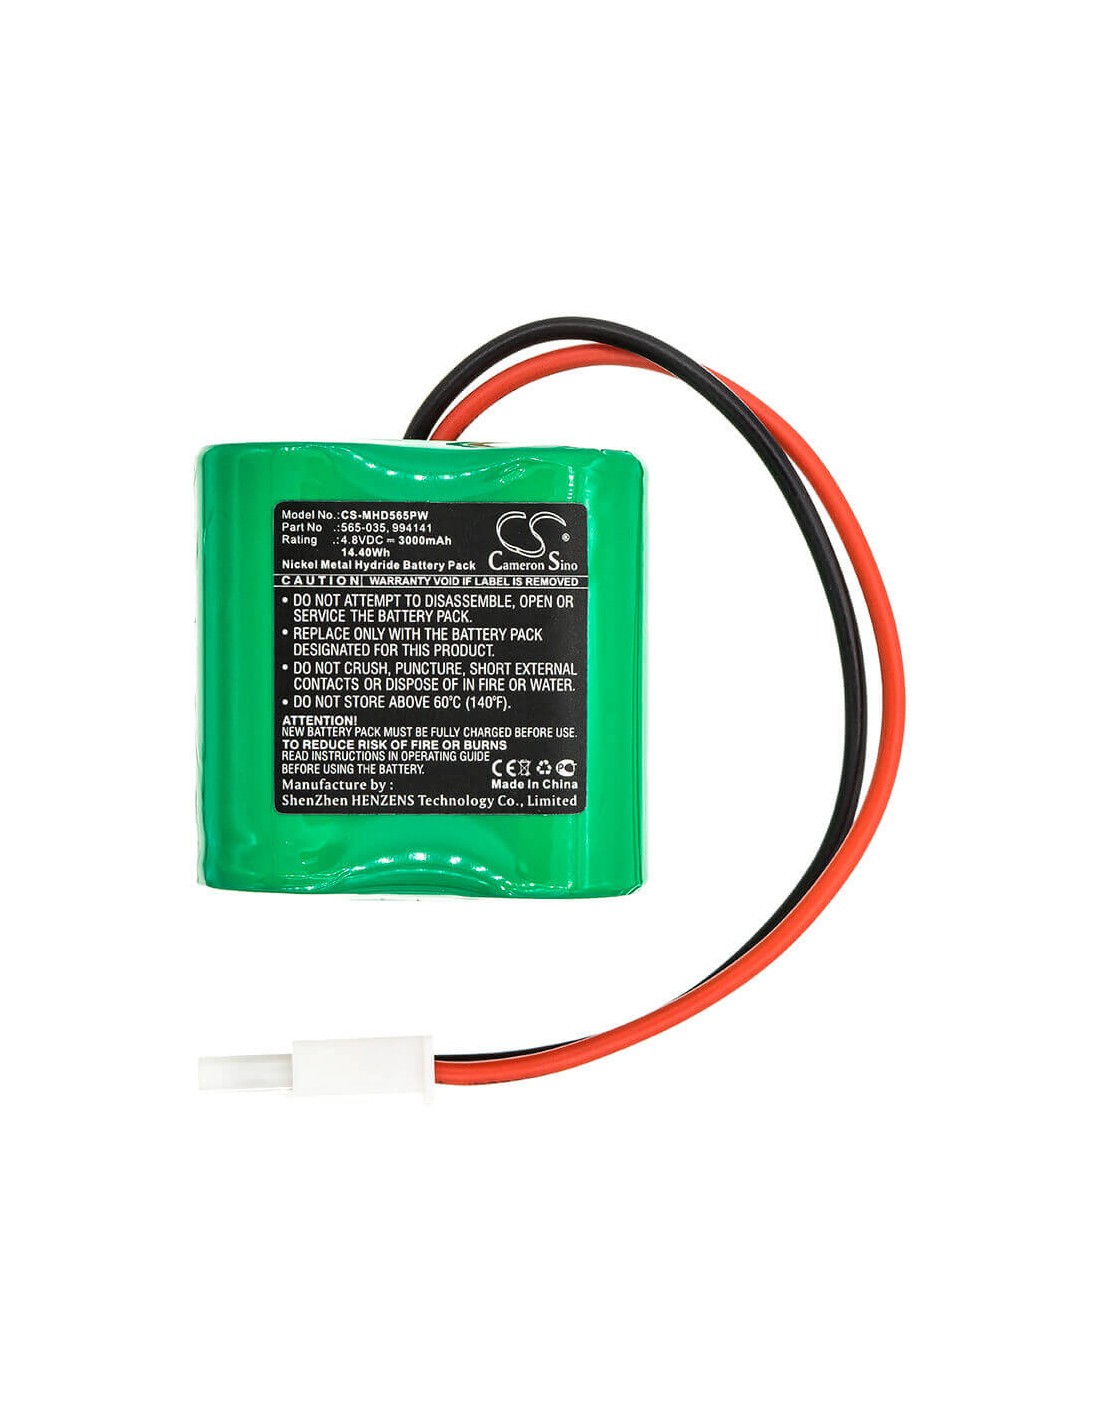 Battery for Mosquito Magnet, Independence 4.8V, 3000mAh - 14.40Wh